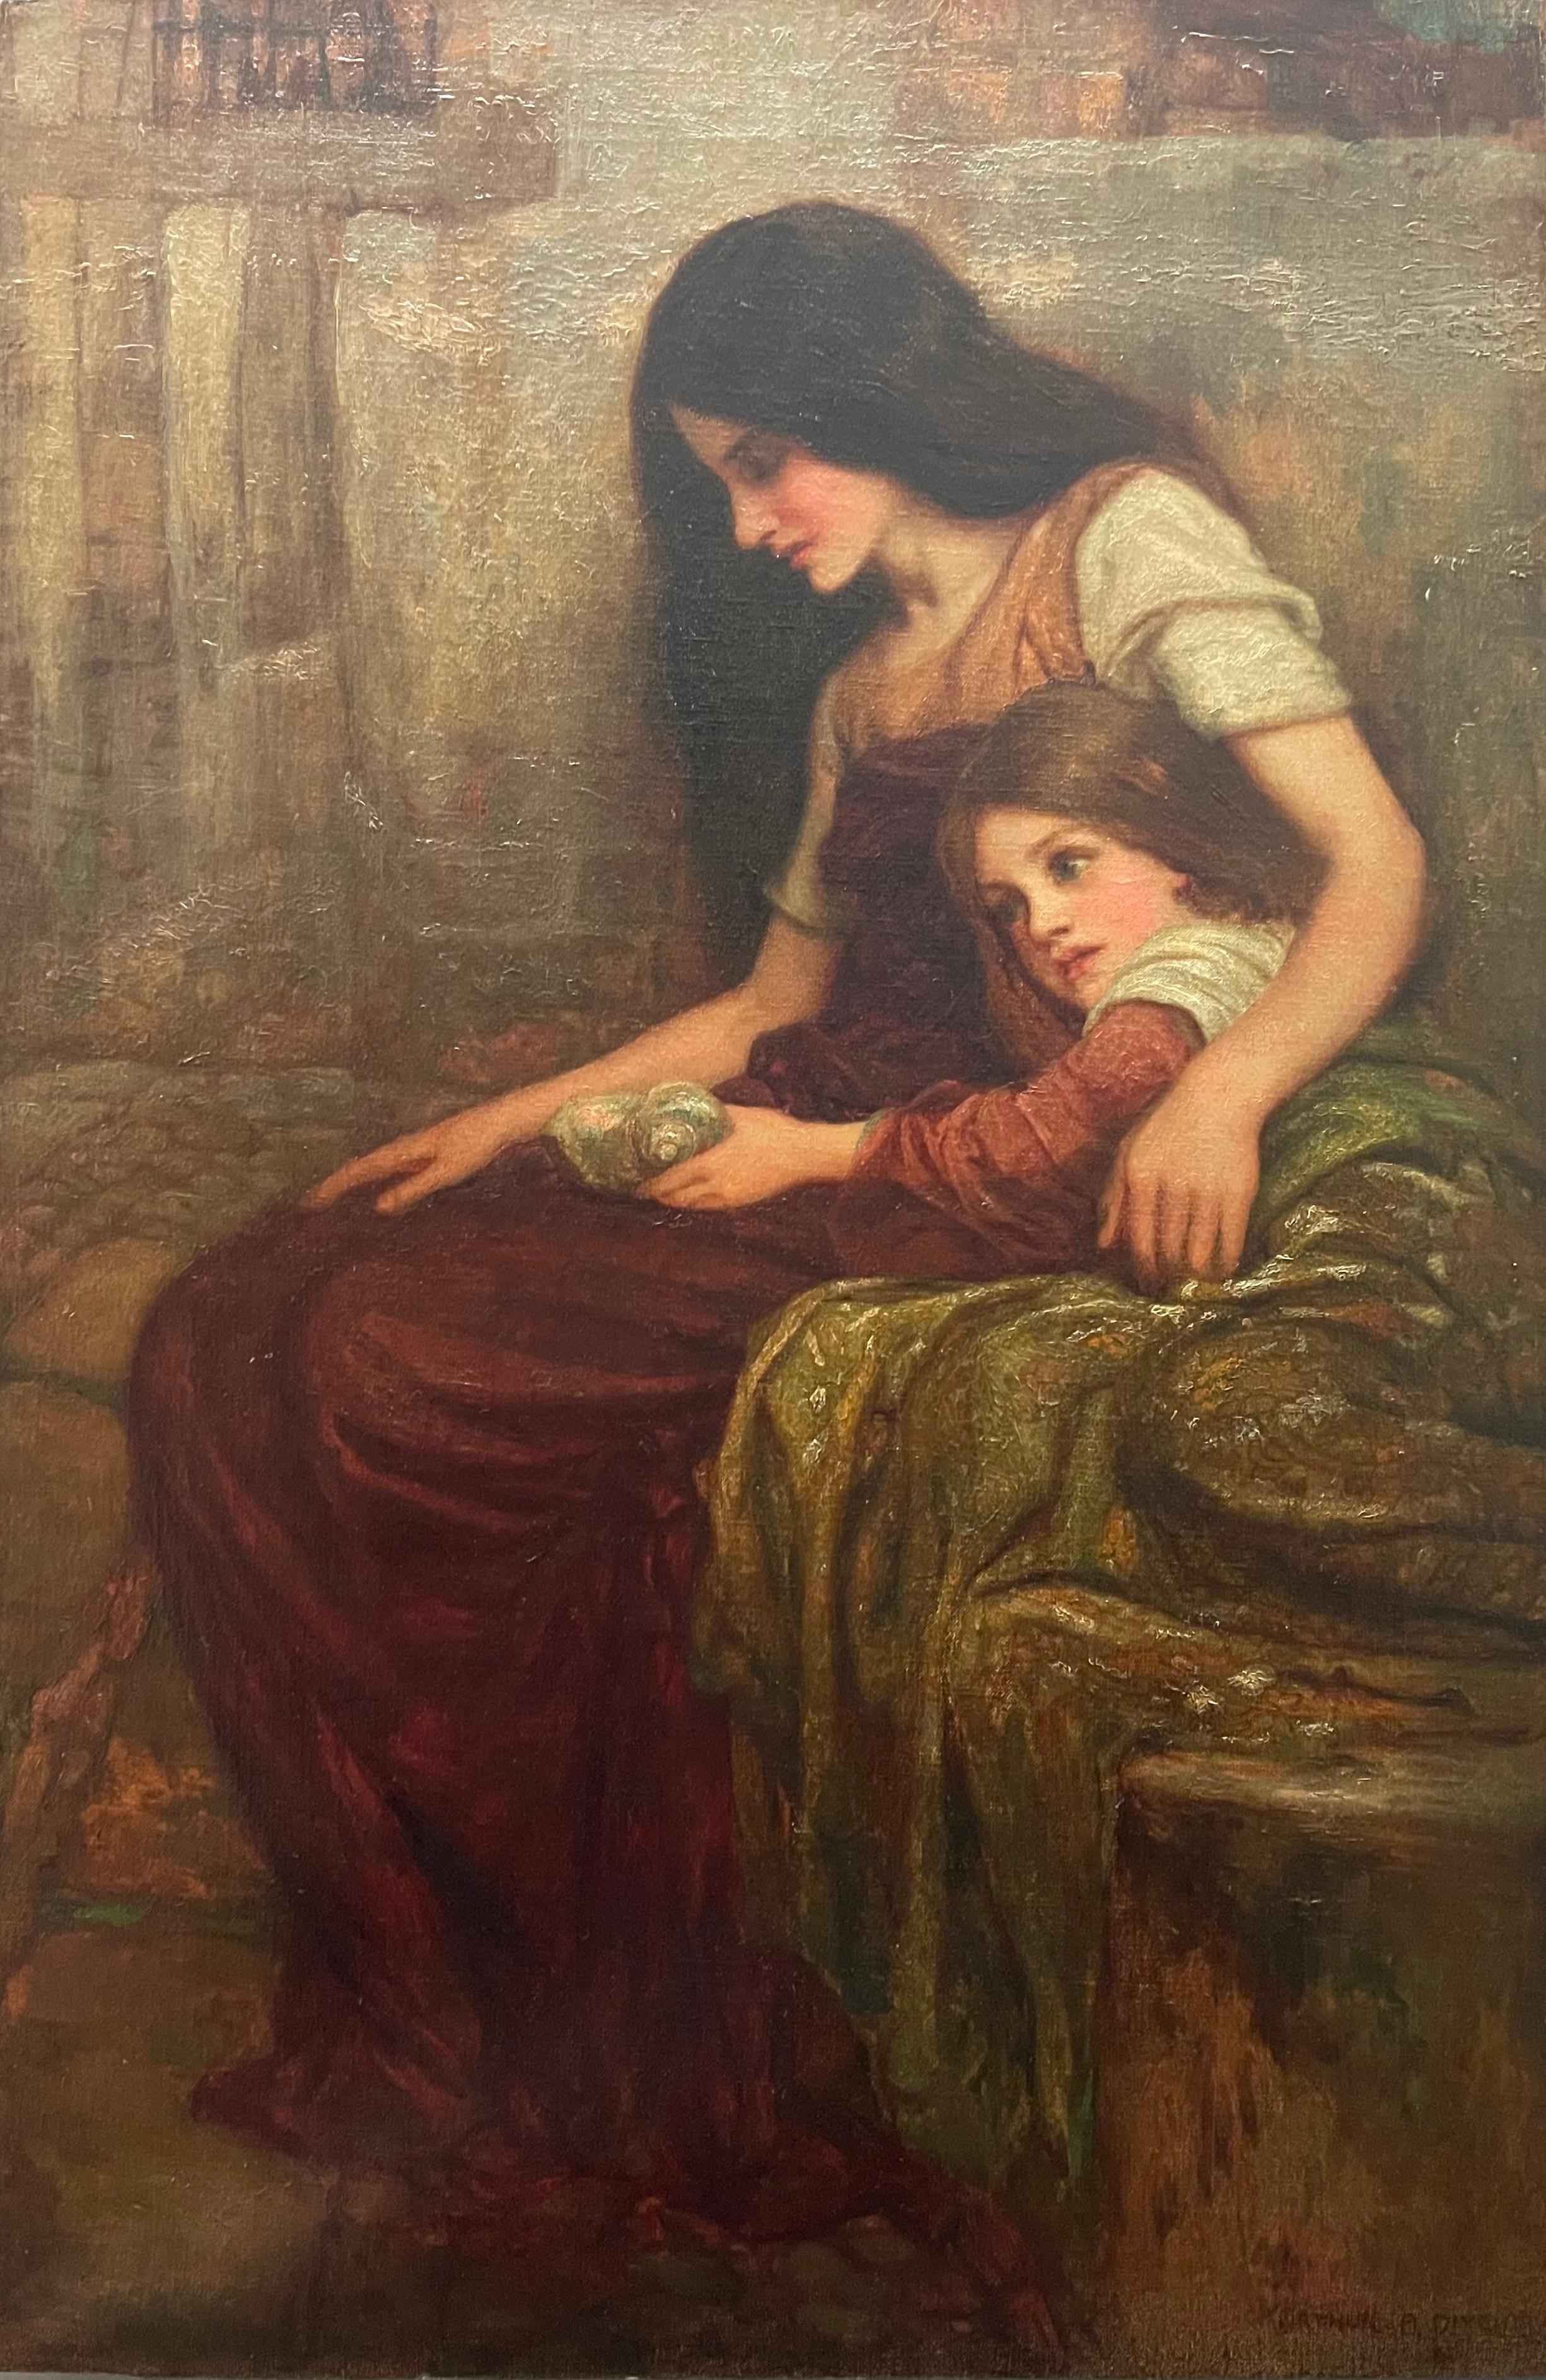 This tender painting is by Arthur Augustus Dixon, a great English artist who lived between the late 19th century and early 20th century. 
This painting is extremely rare for its subject, period, and style. 
From a young age, Arthur A. Dixon was